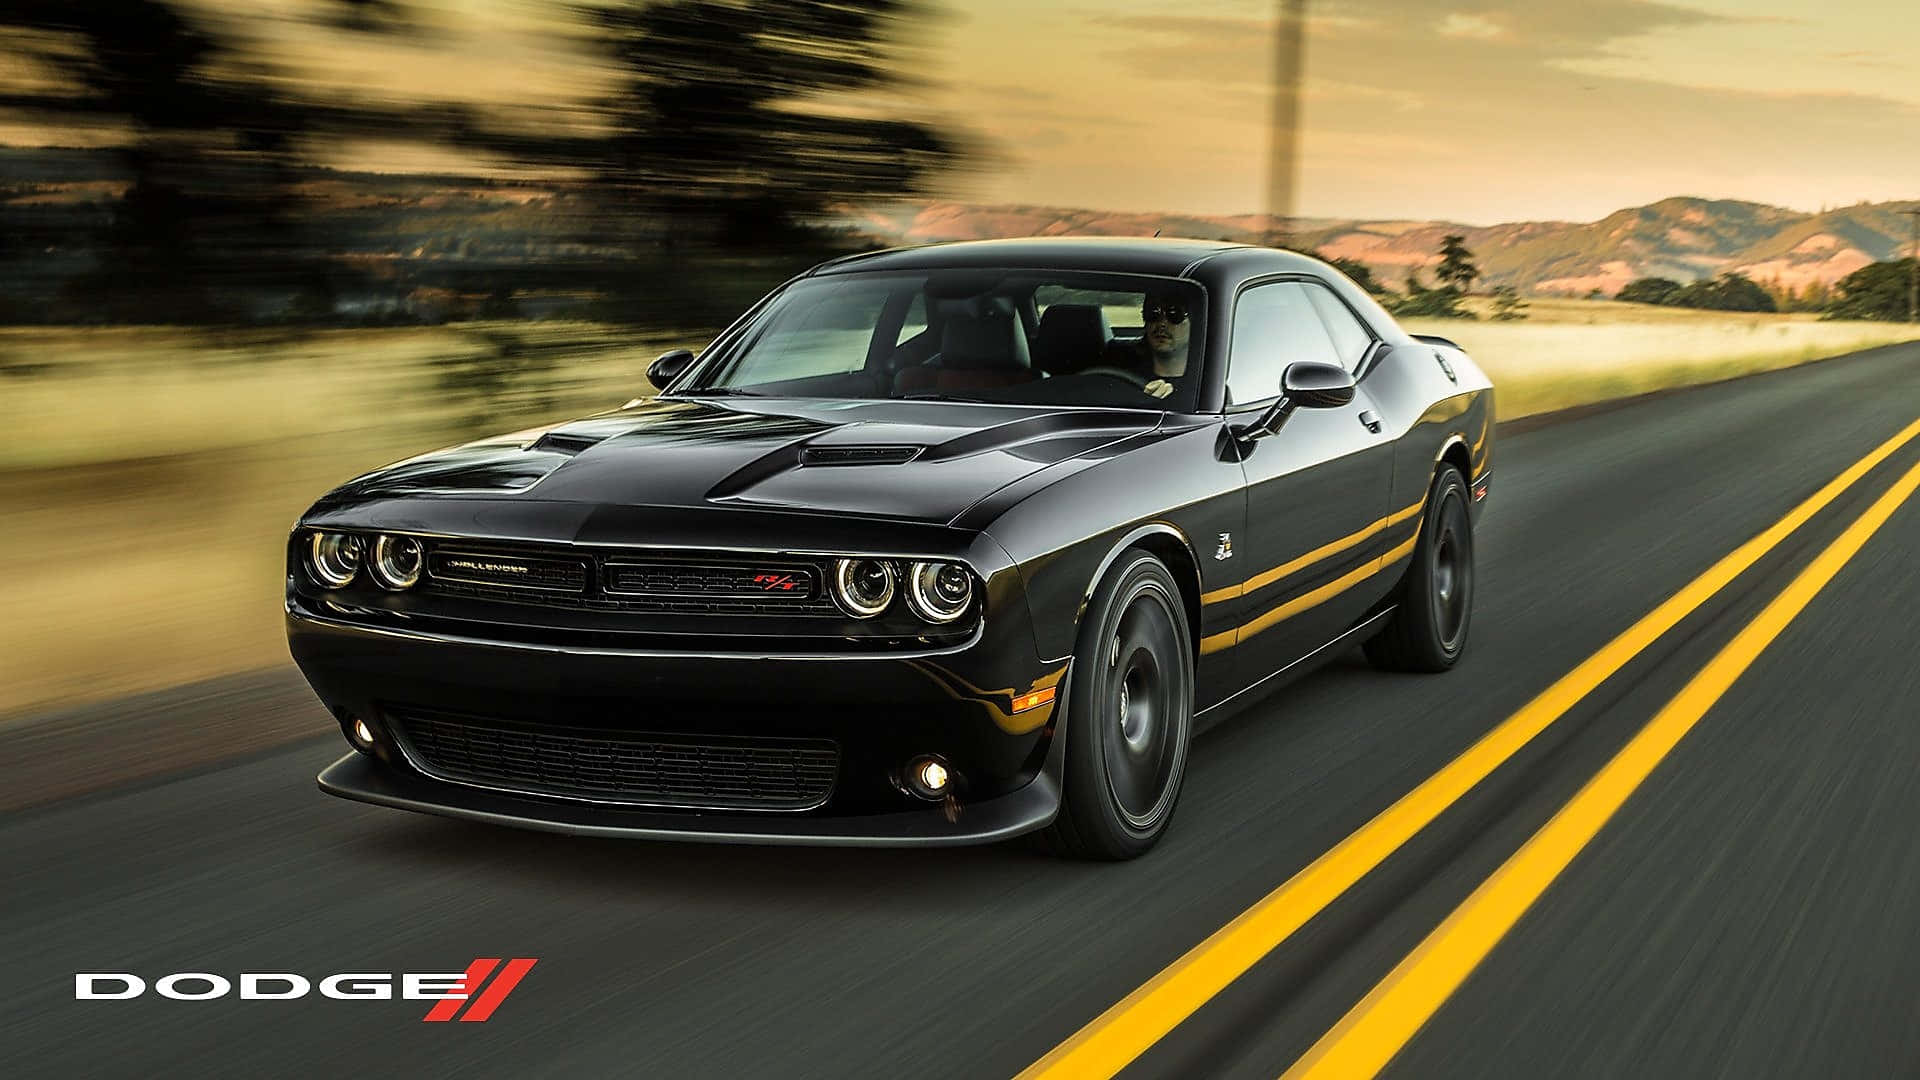 Drive in Style in the New Dodge